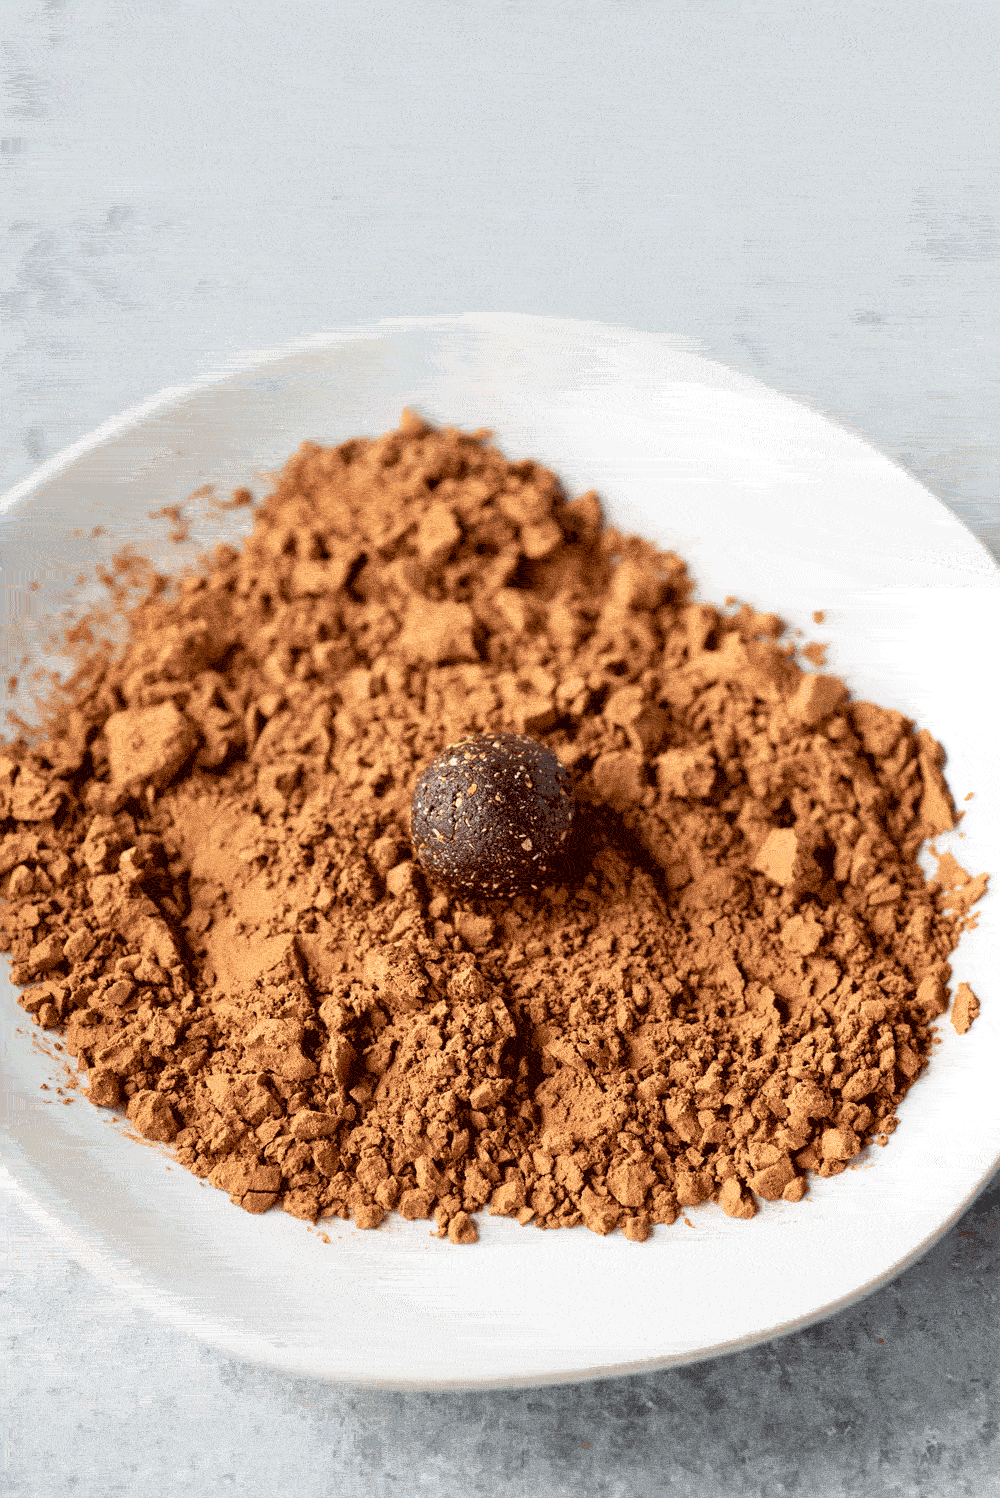 Gif of a single Ginger Bite (an all-natural upset stomach remedy) being rolled in cocoa powder